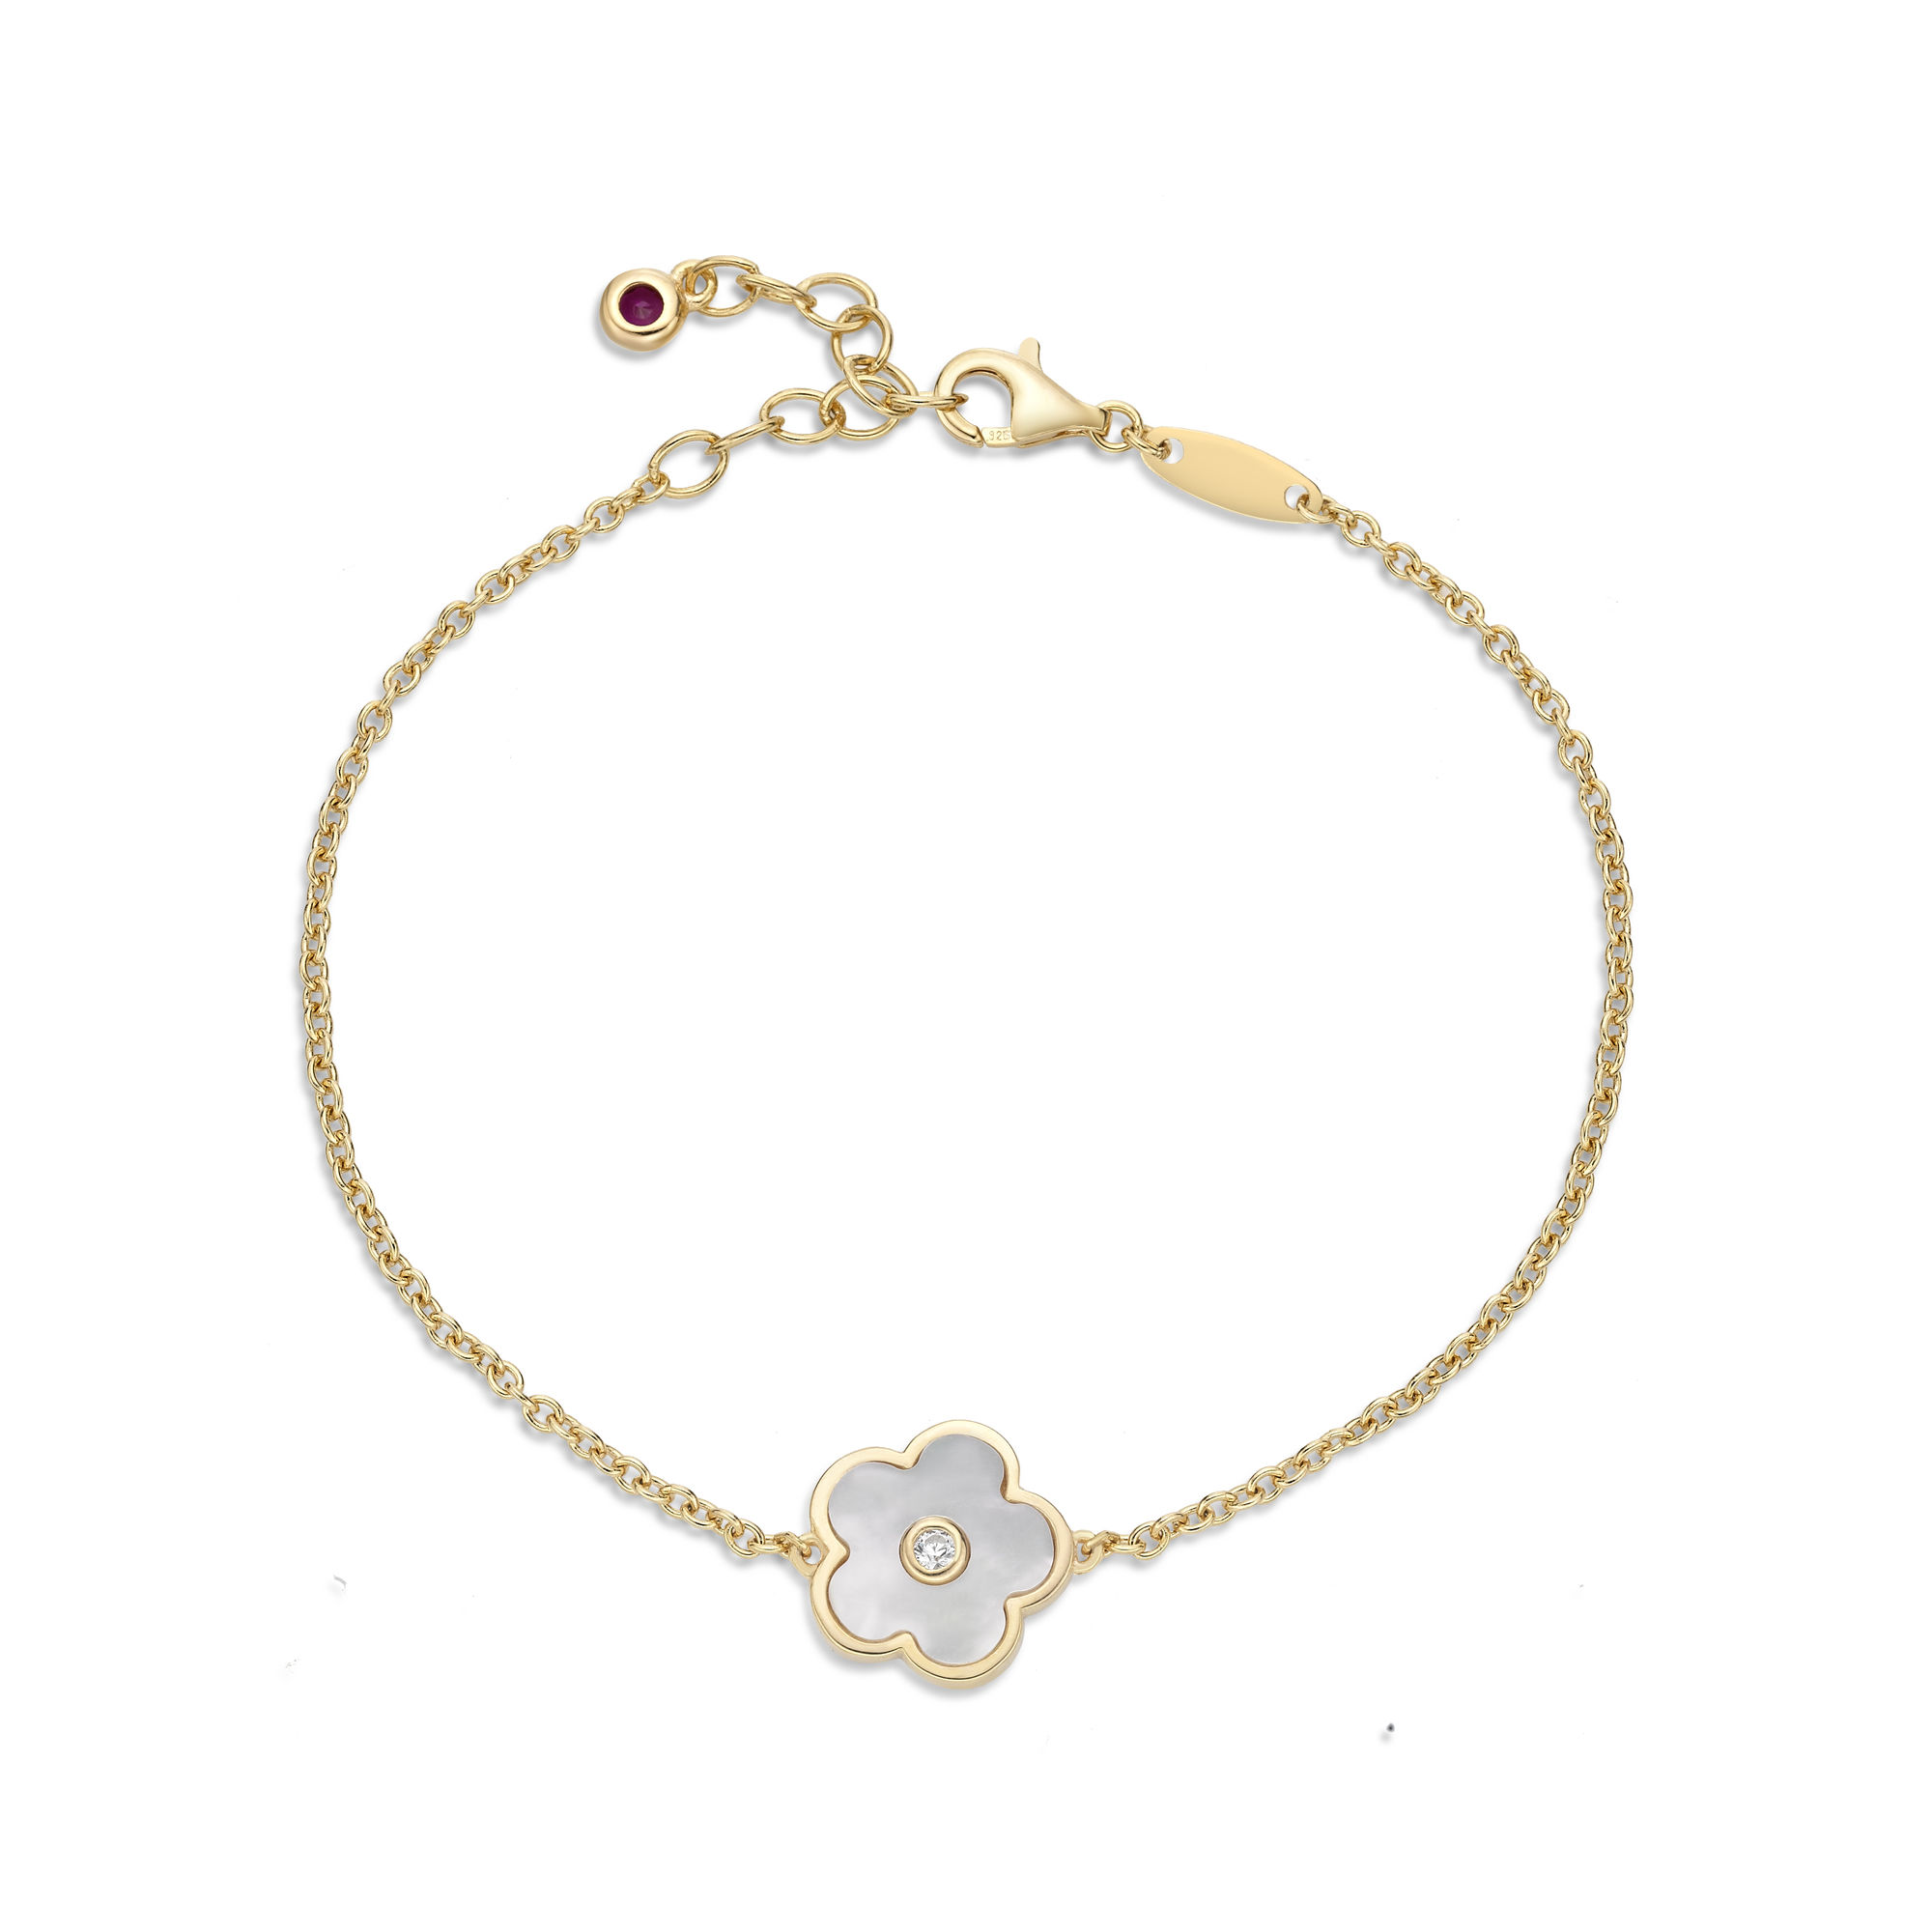 Women's Mother of Pearl Triple Flower Bracelet in Yellow Gold Plated Sterling Silver with Cubic Zirconia - 7-8 Inch Adjustable Cable Chain - Flora | Lavari Jewelers